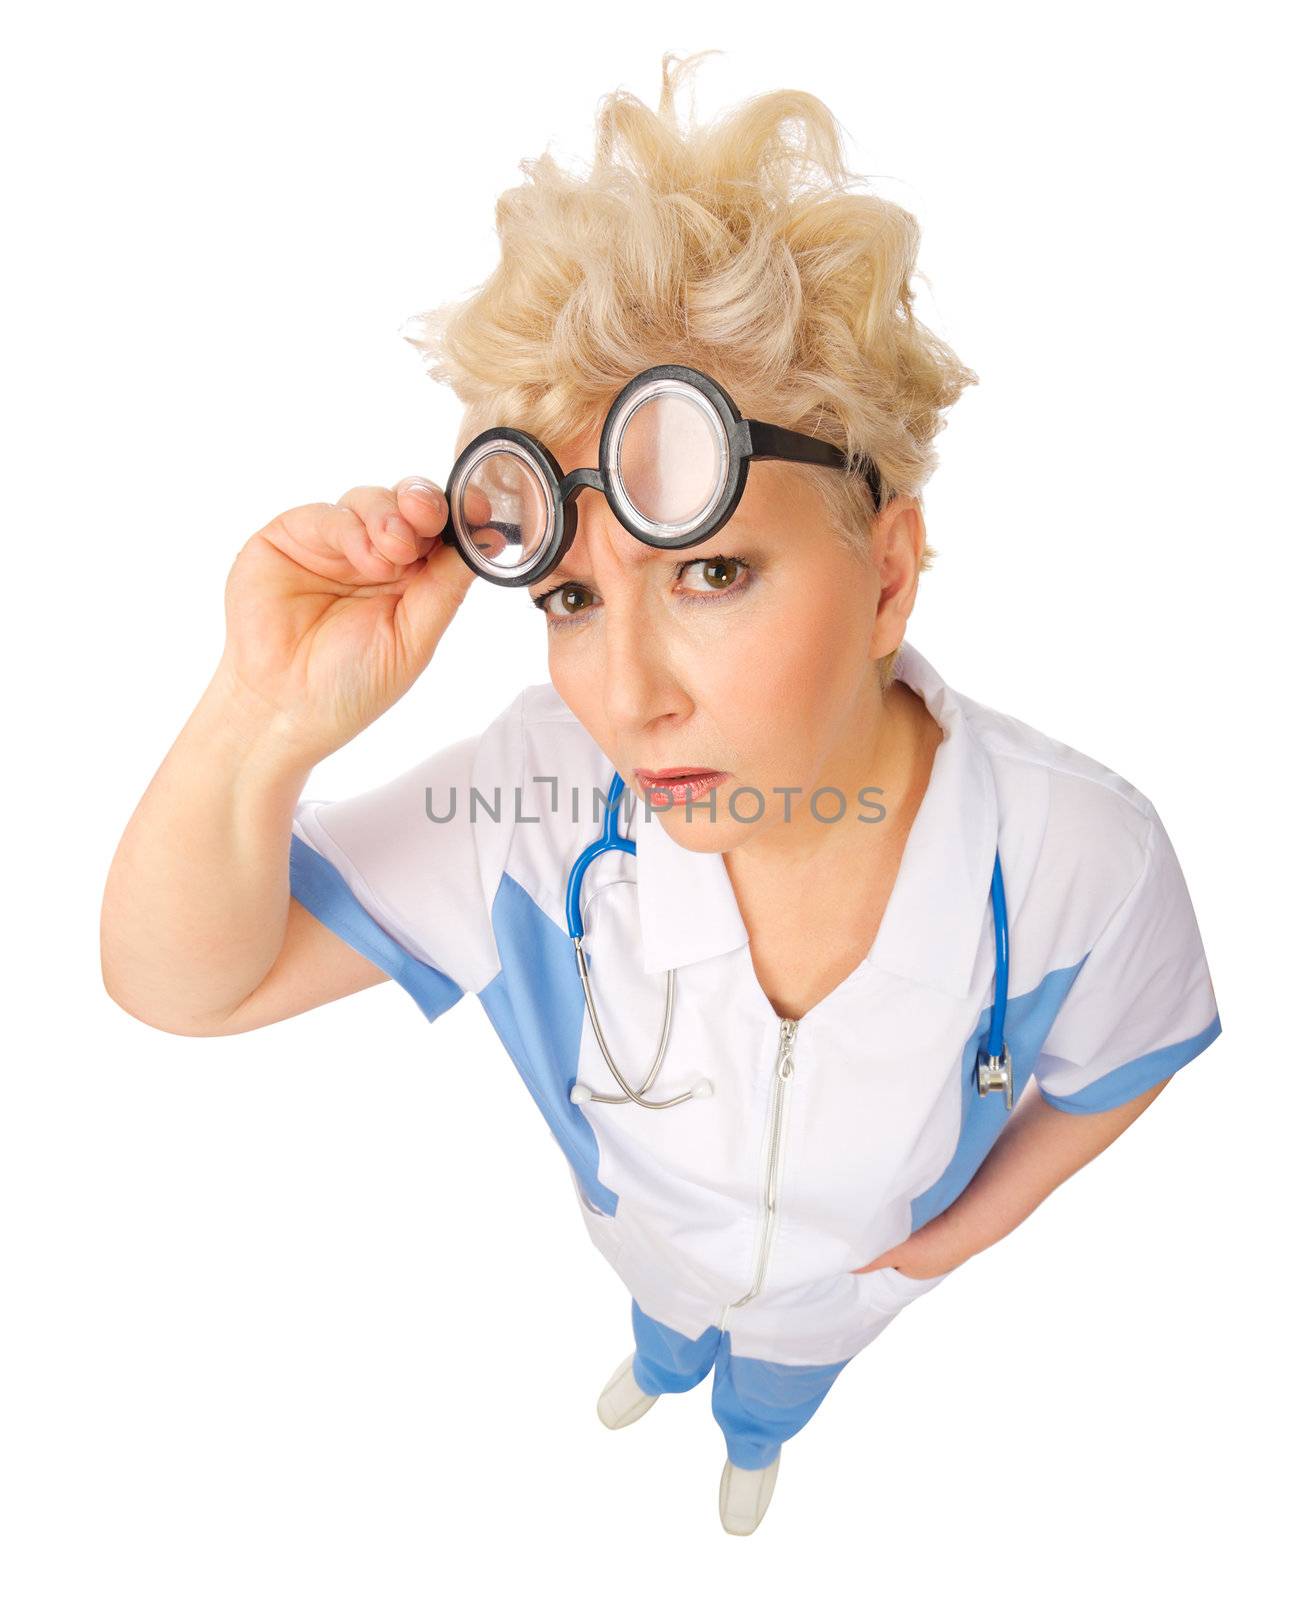 Funny mature doctor with glasses by rbv